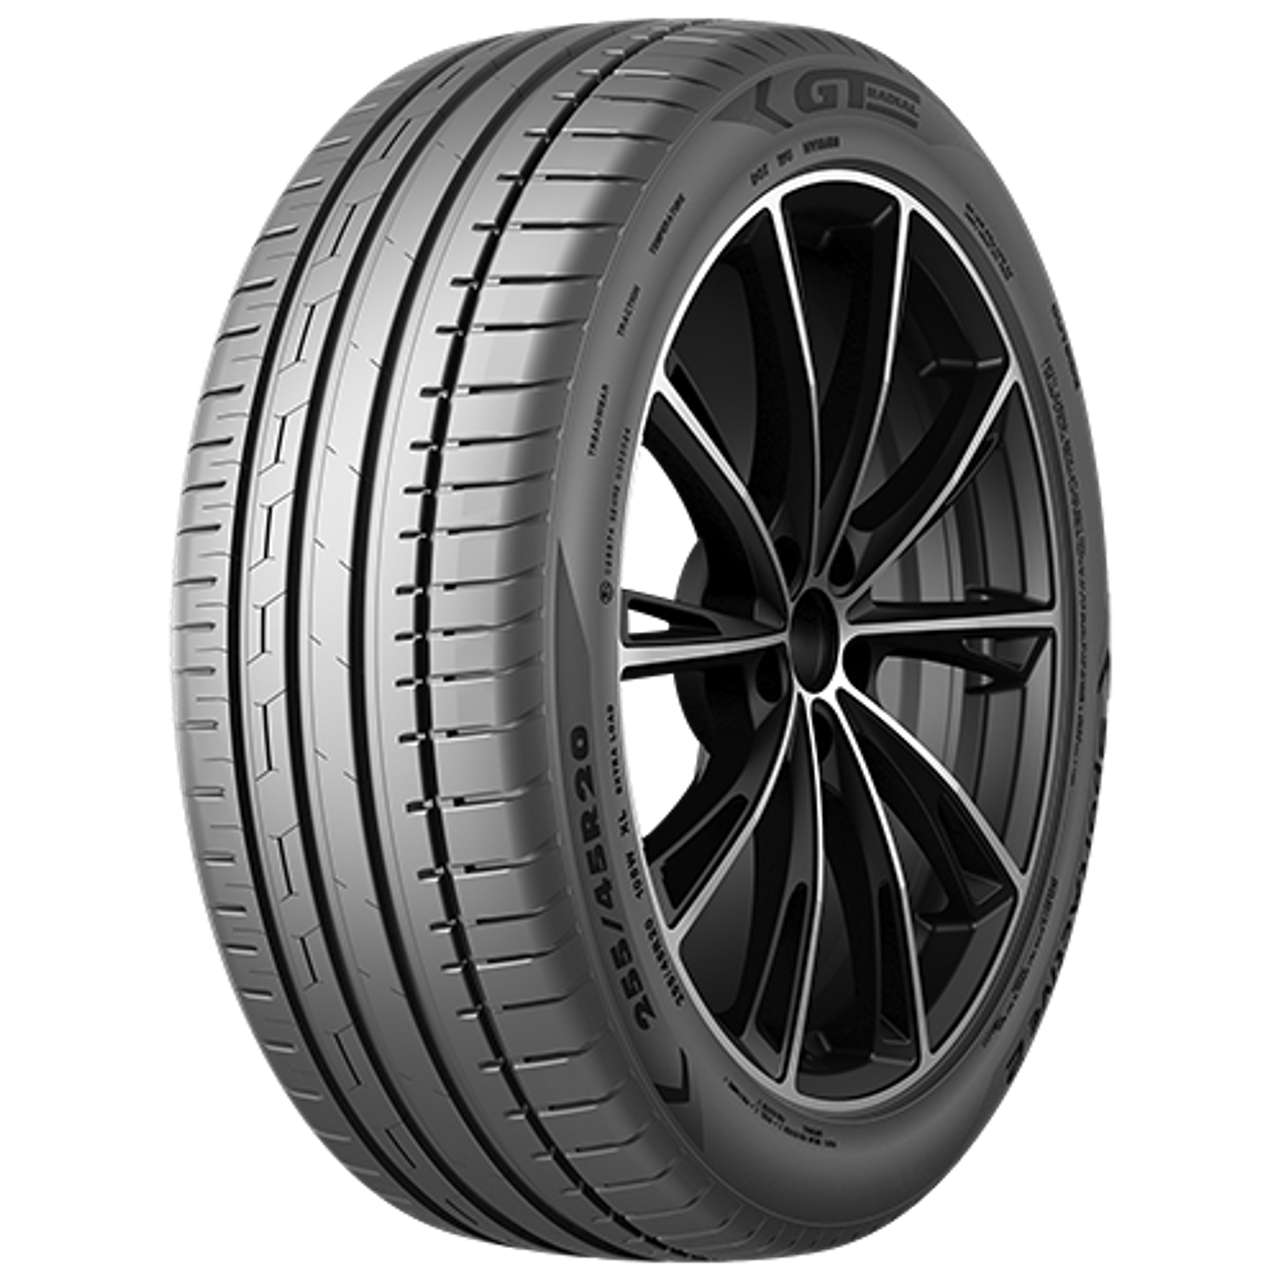 GT-RADIAL SPORTACTIVE 2 255/45R18 103W BSW